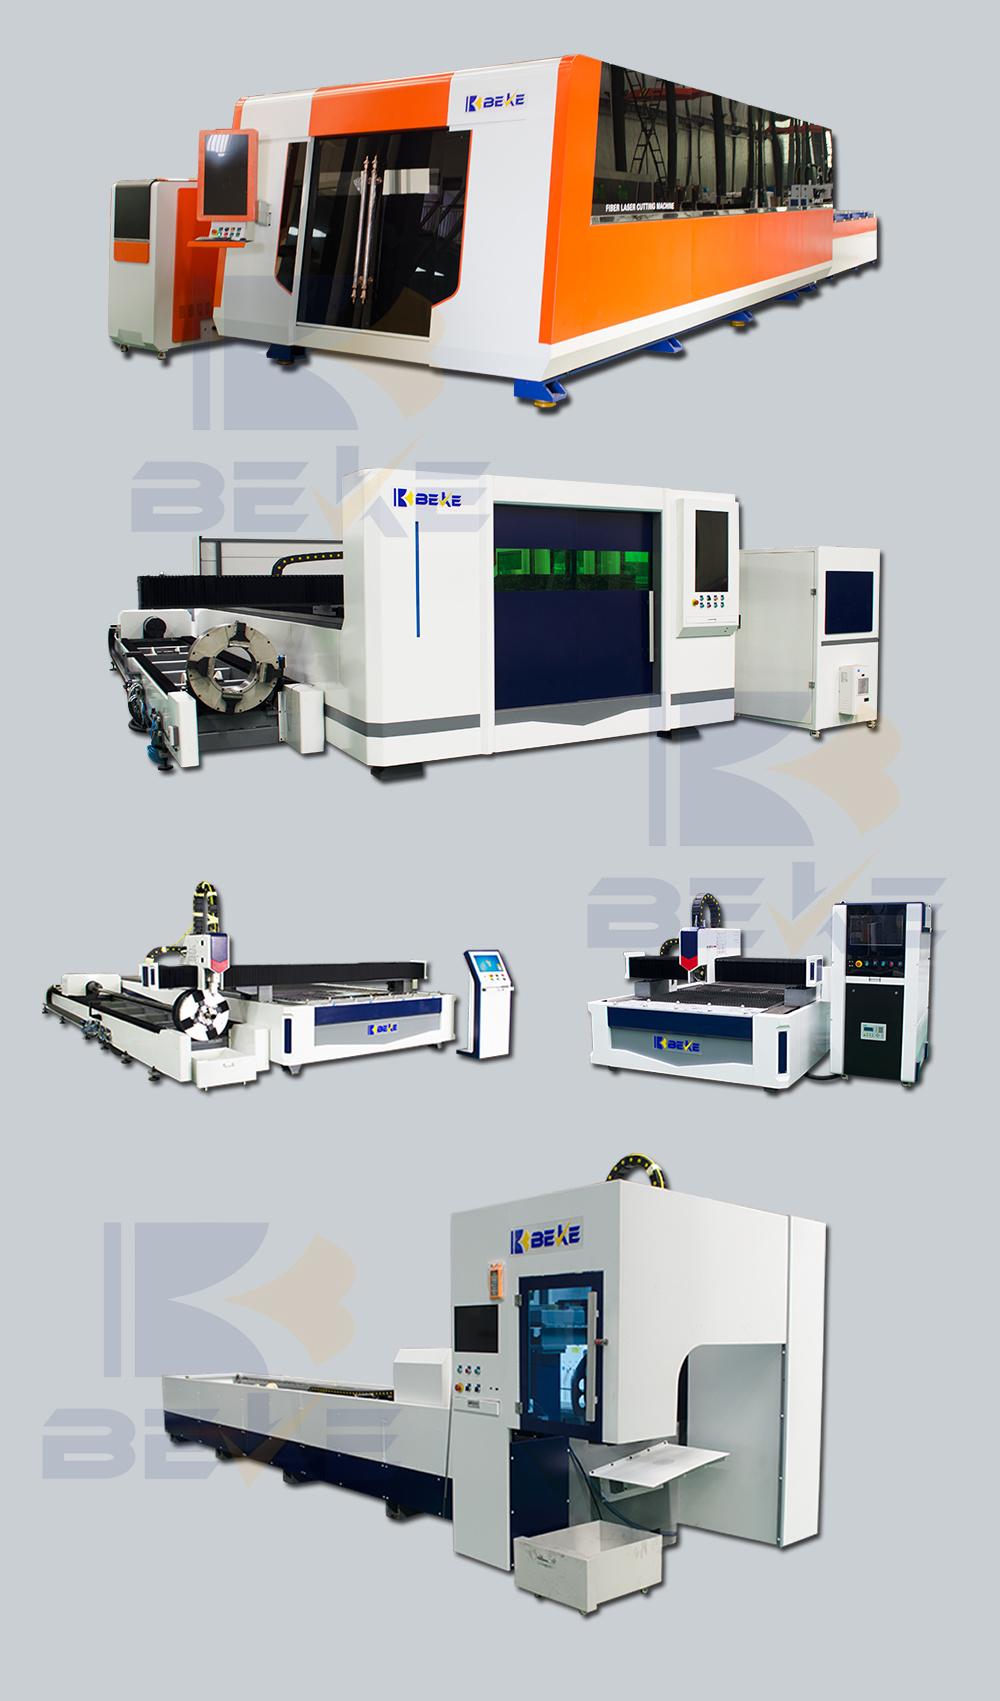 Bk 3015 CNC Single Table Stainless Steel Shaat Laser Cutting Machine Sale Online